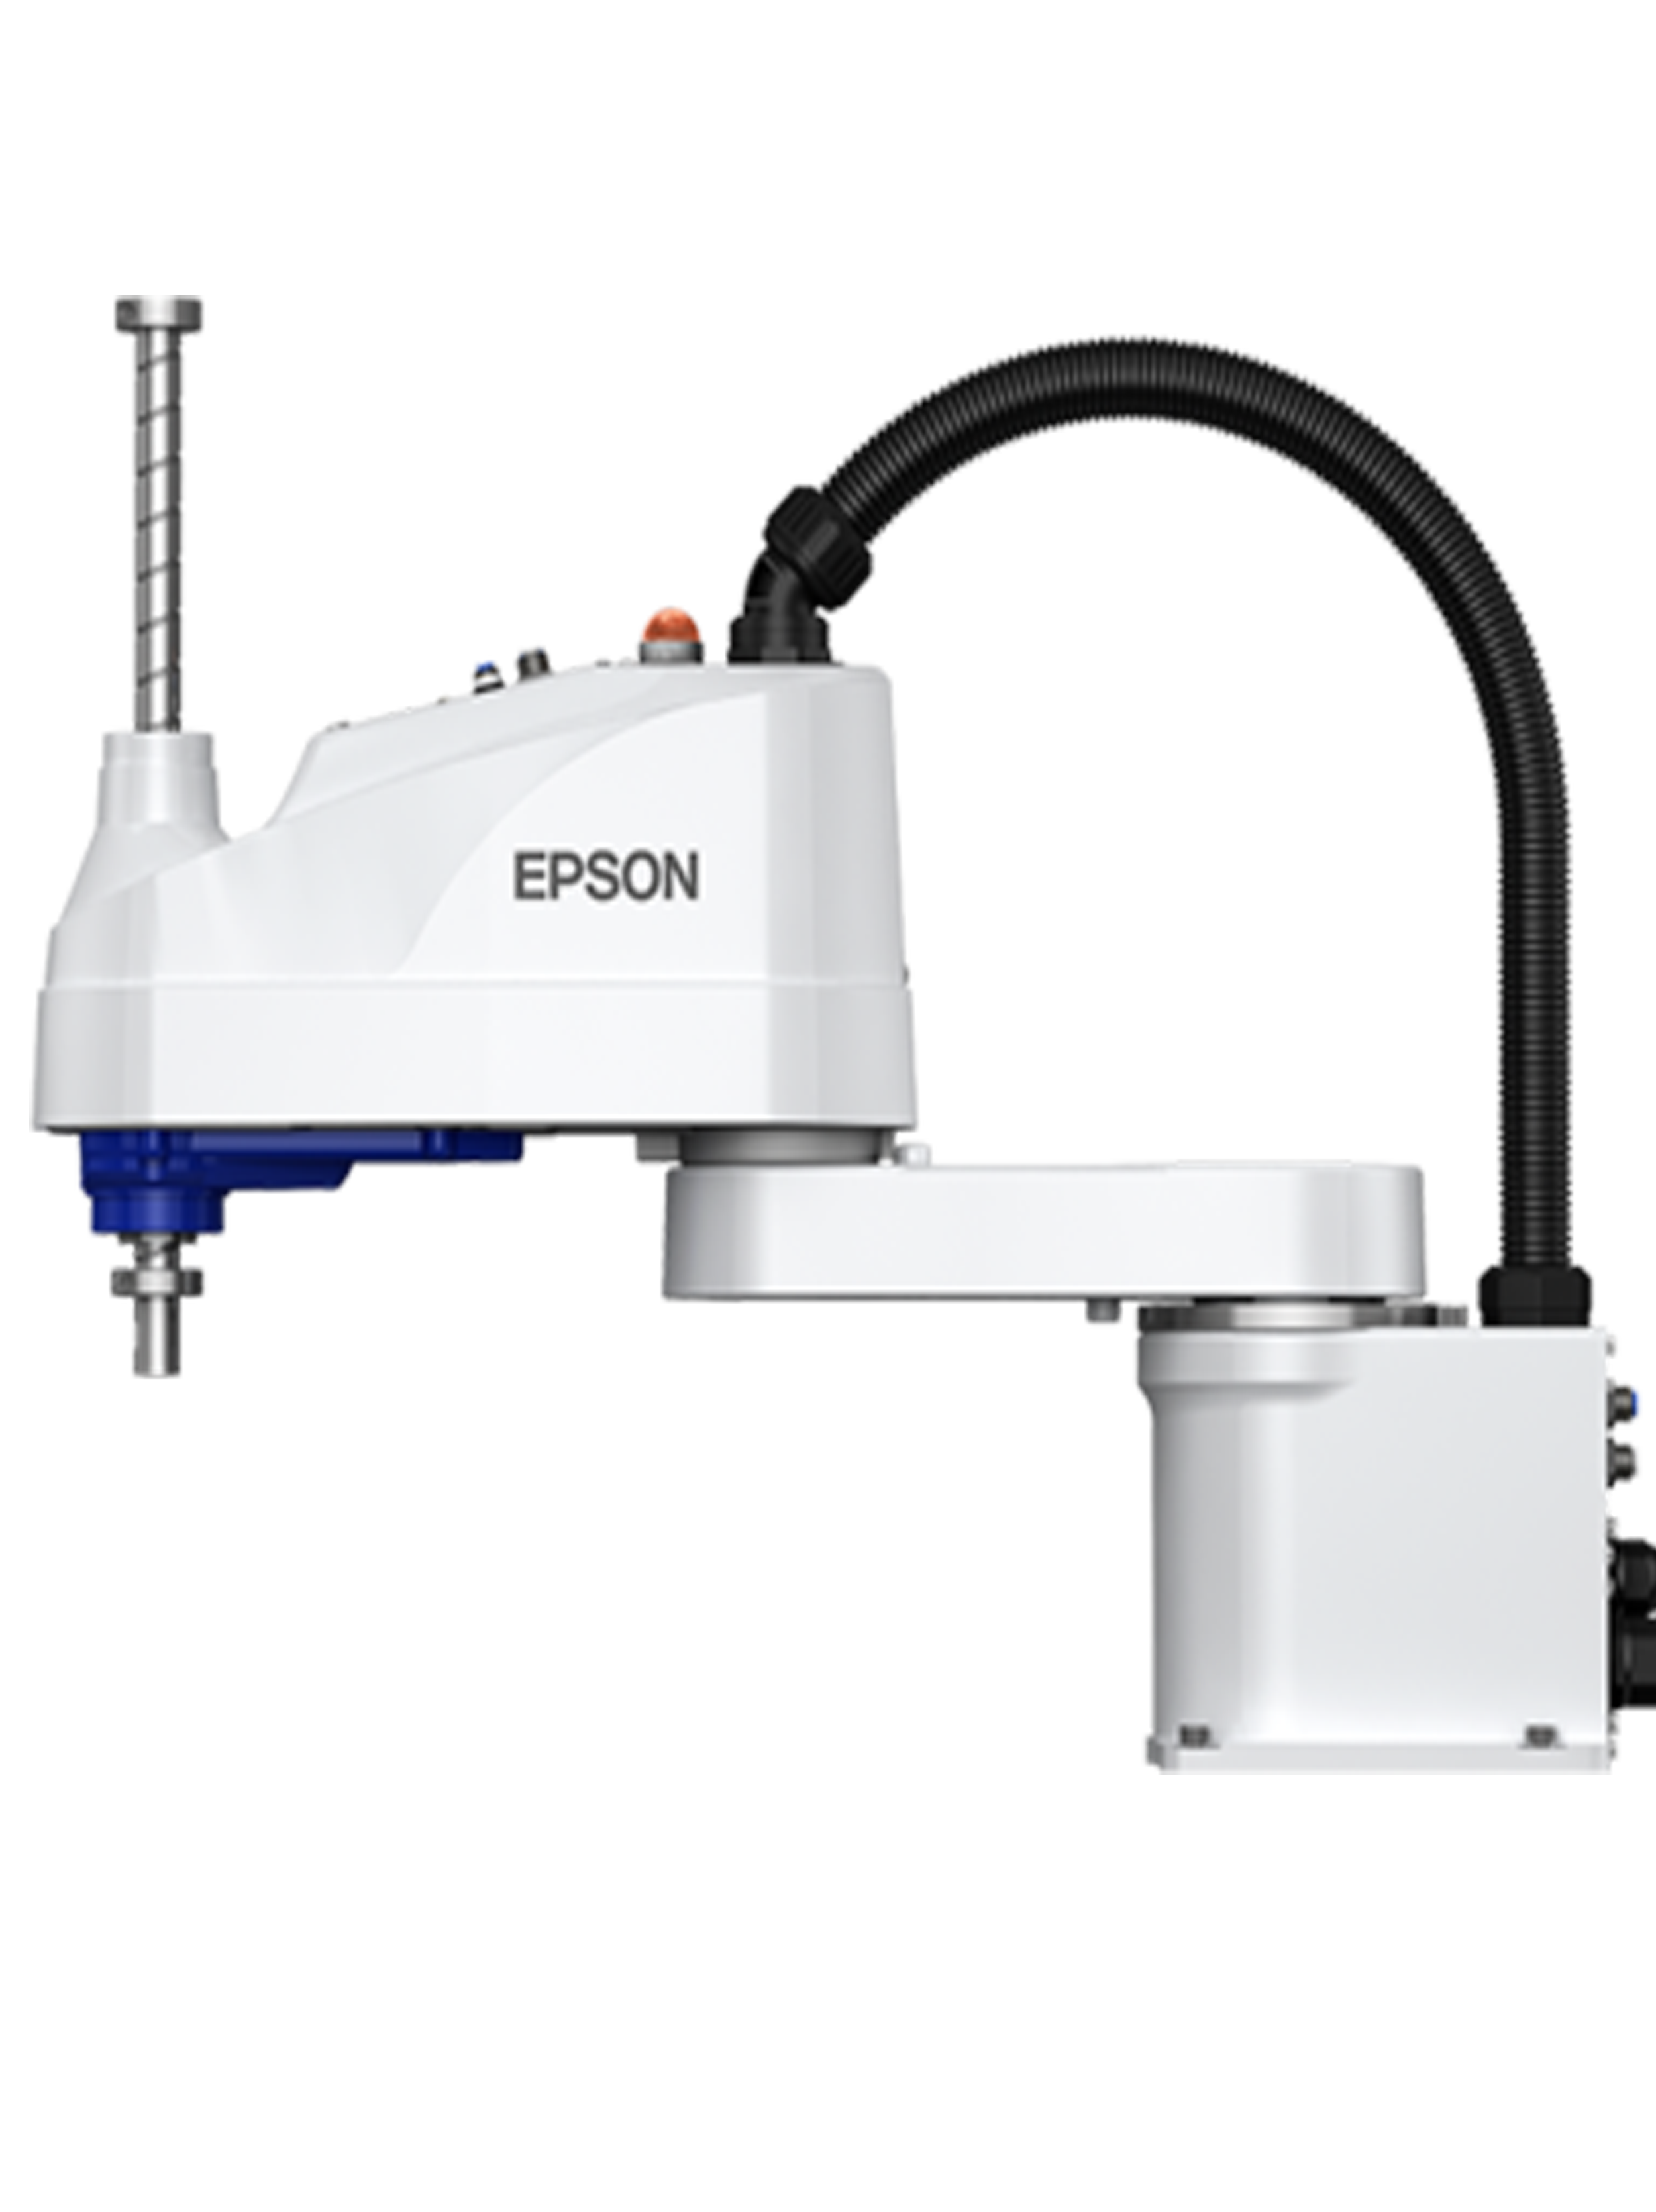 Schneider & Company - Epson industrial robot arm poised for precision automation.